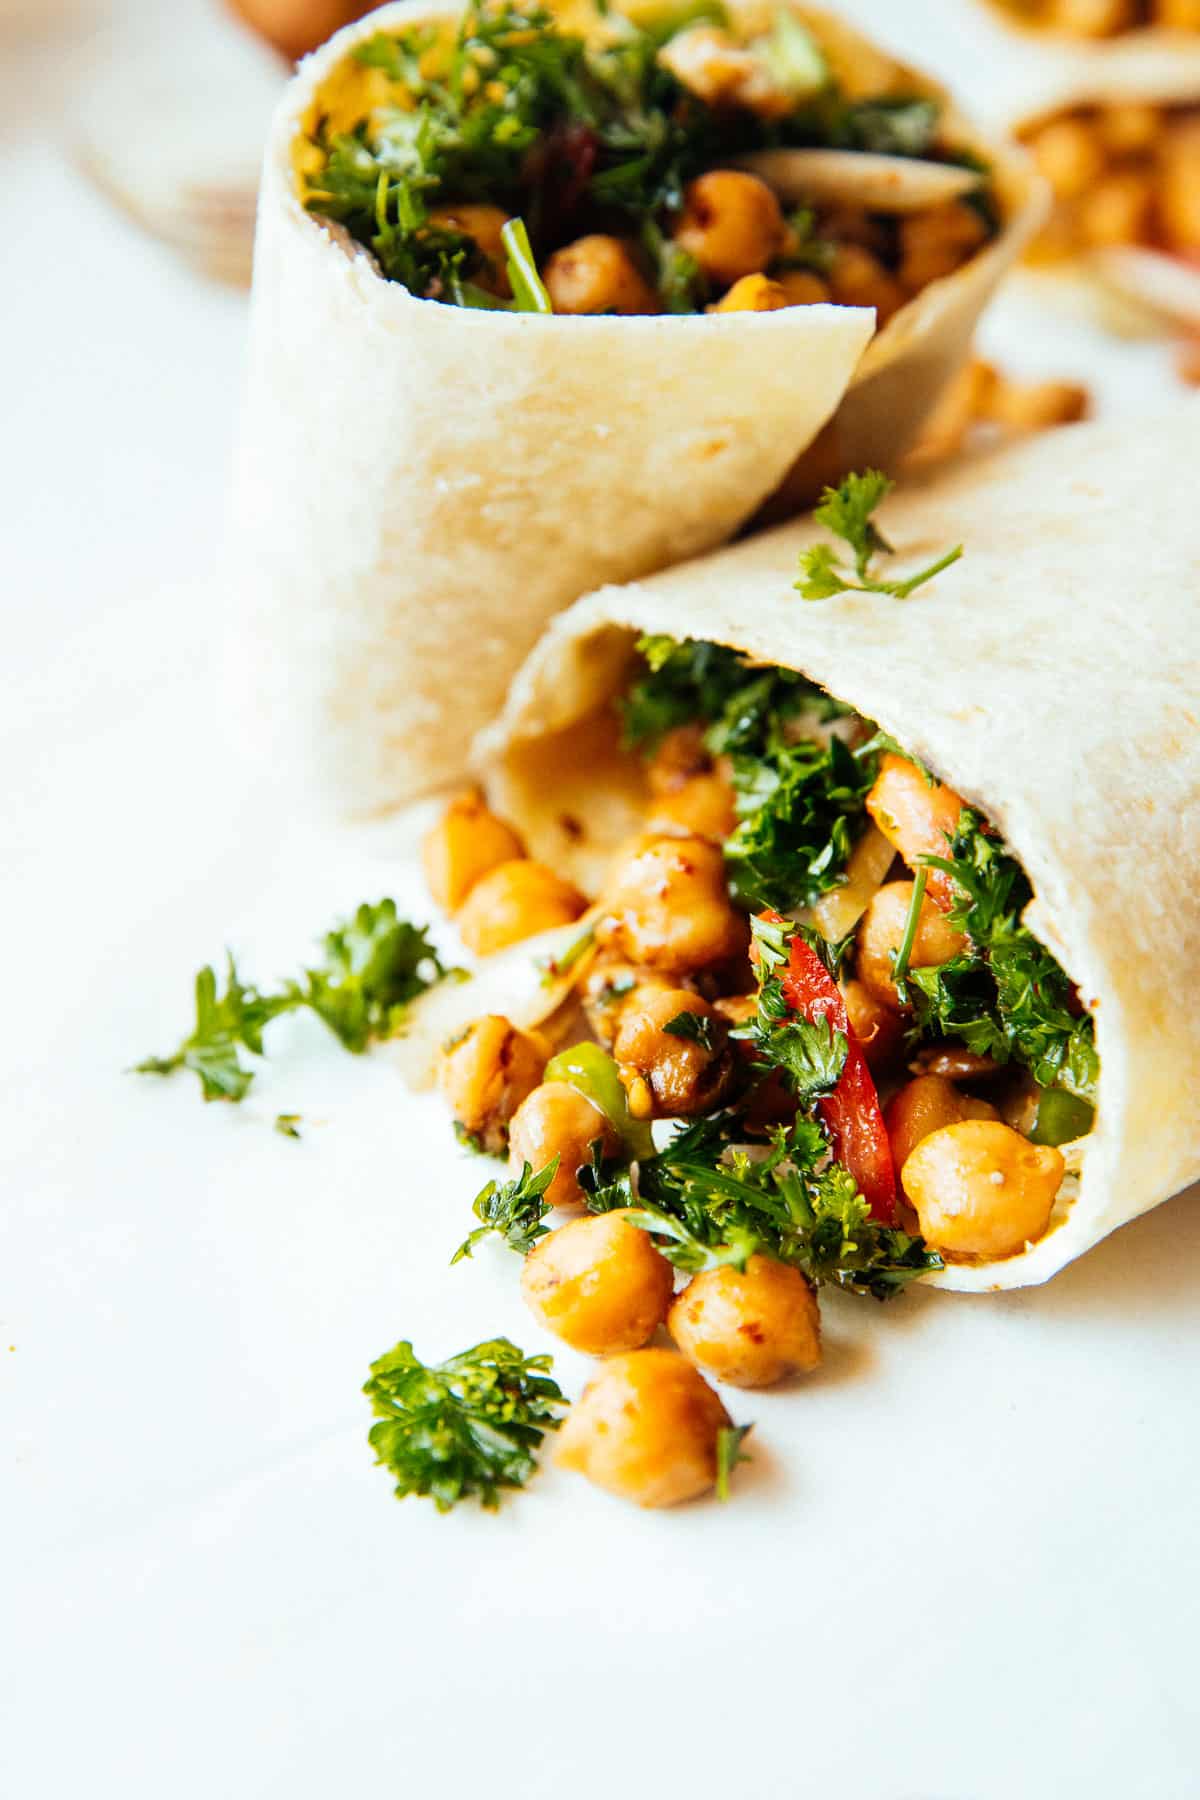 chickpeas spilling out from wrap